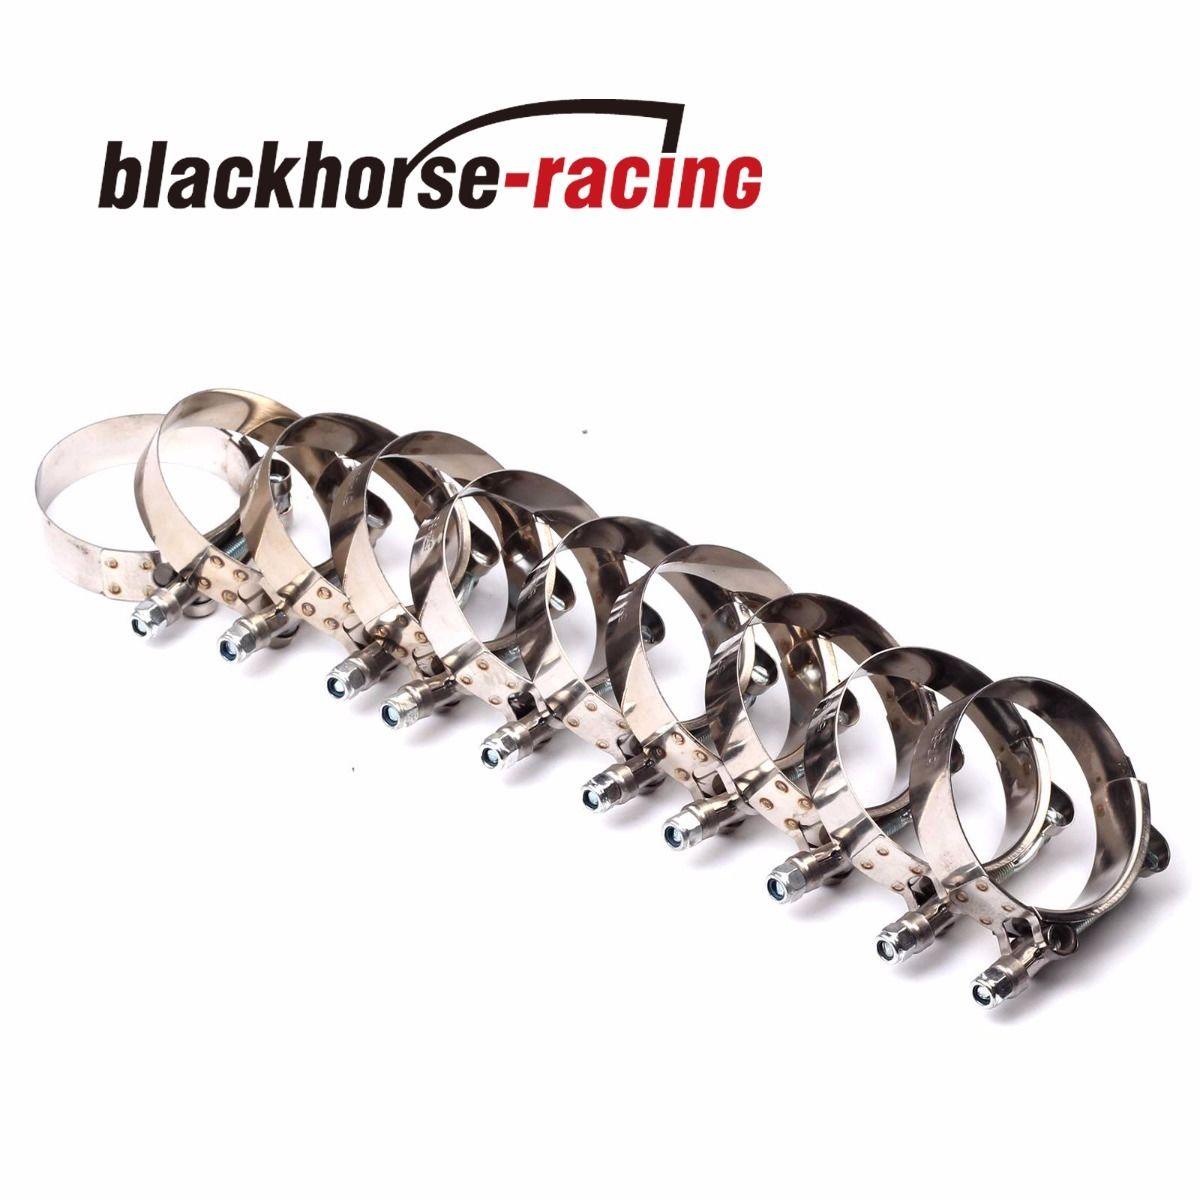 10PCS 3.35''(3.62''-3.94'') 301 Stainless Steel T Bolt Clamps Clamp 92mm-100mm - www.blackhorse-racing.com